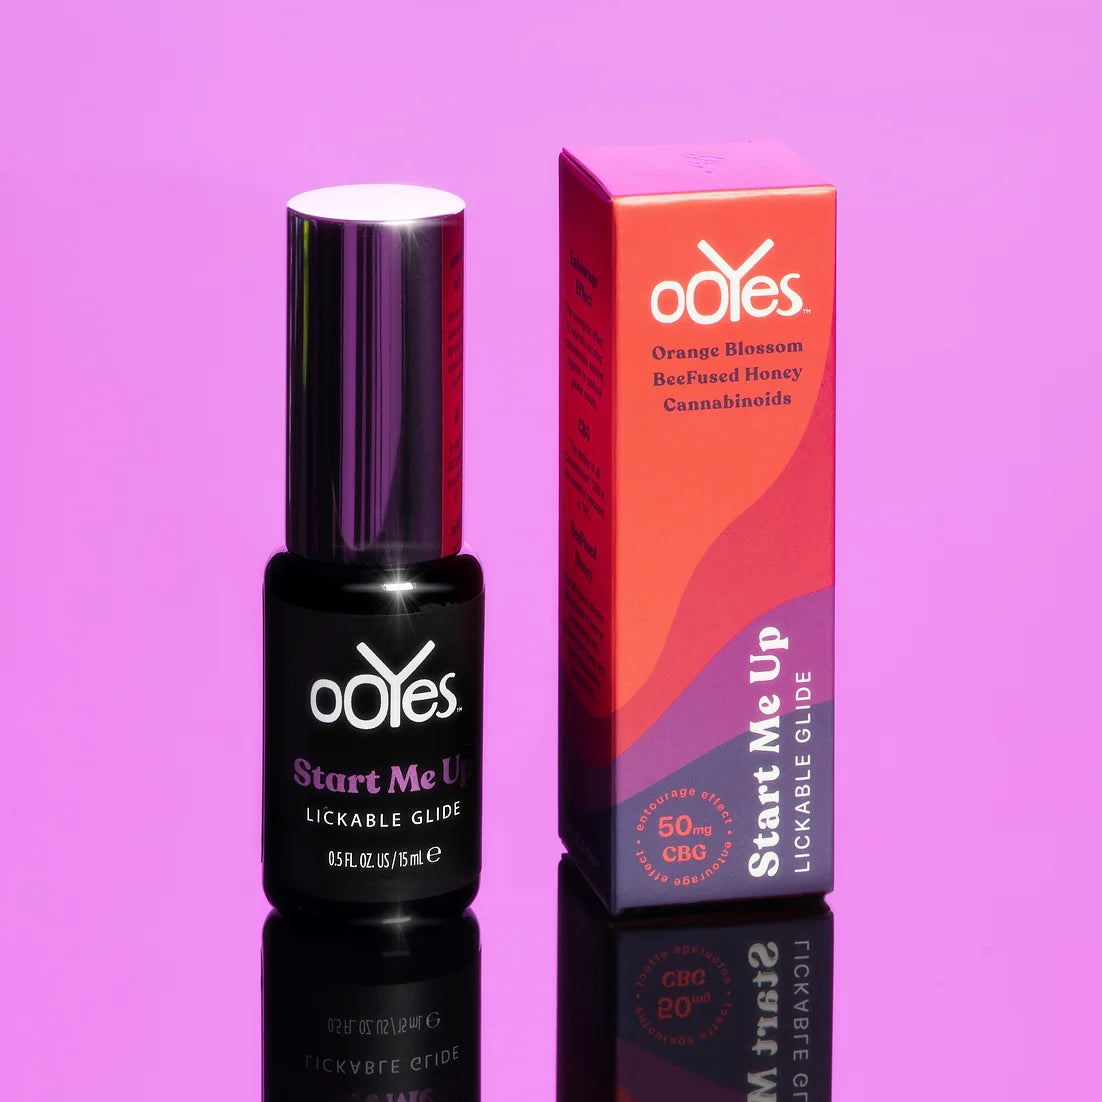 oOYes Intimacy Products CBD + CBG Infused